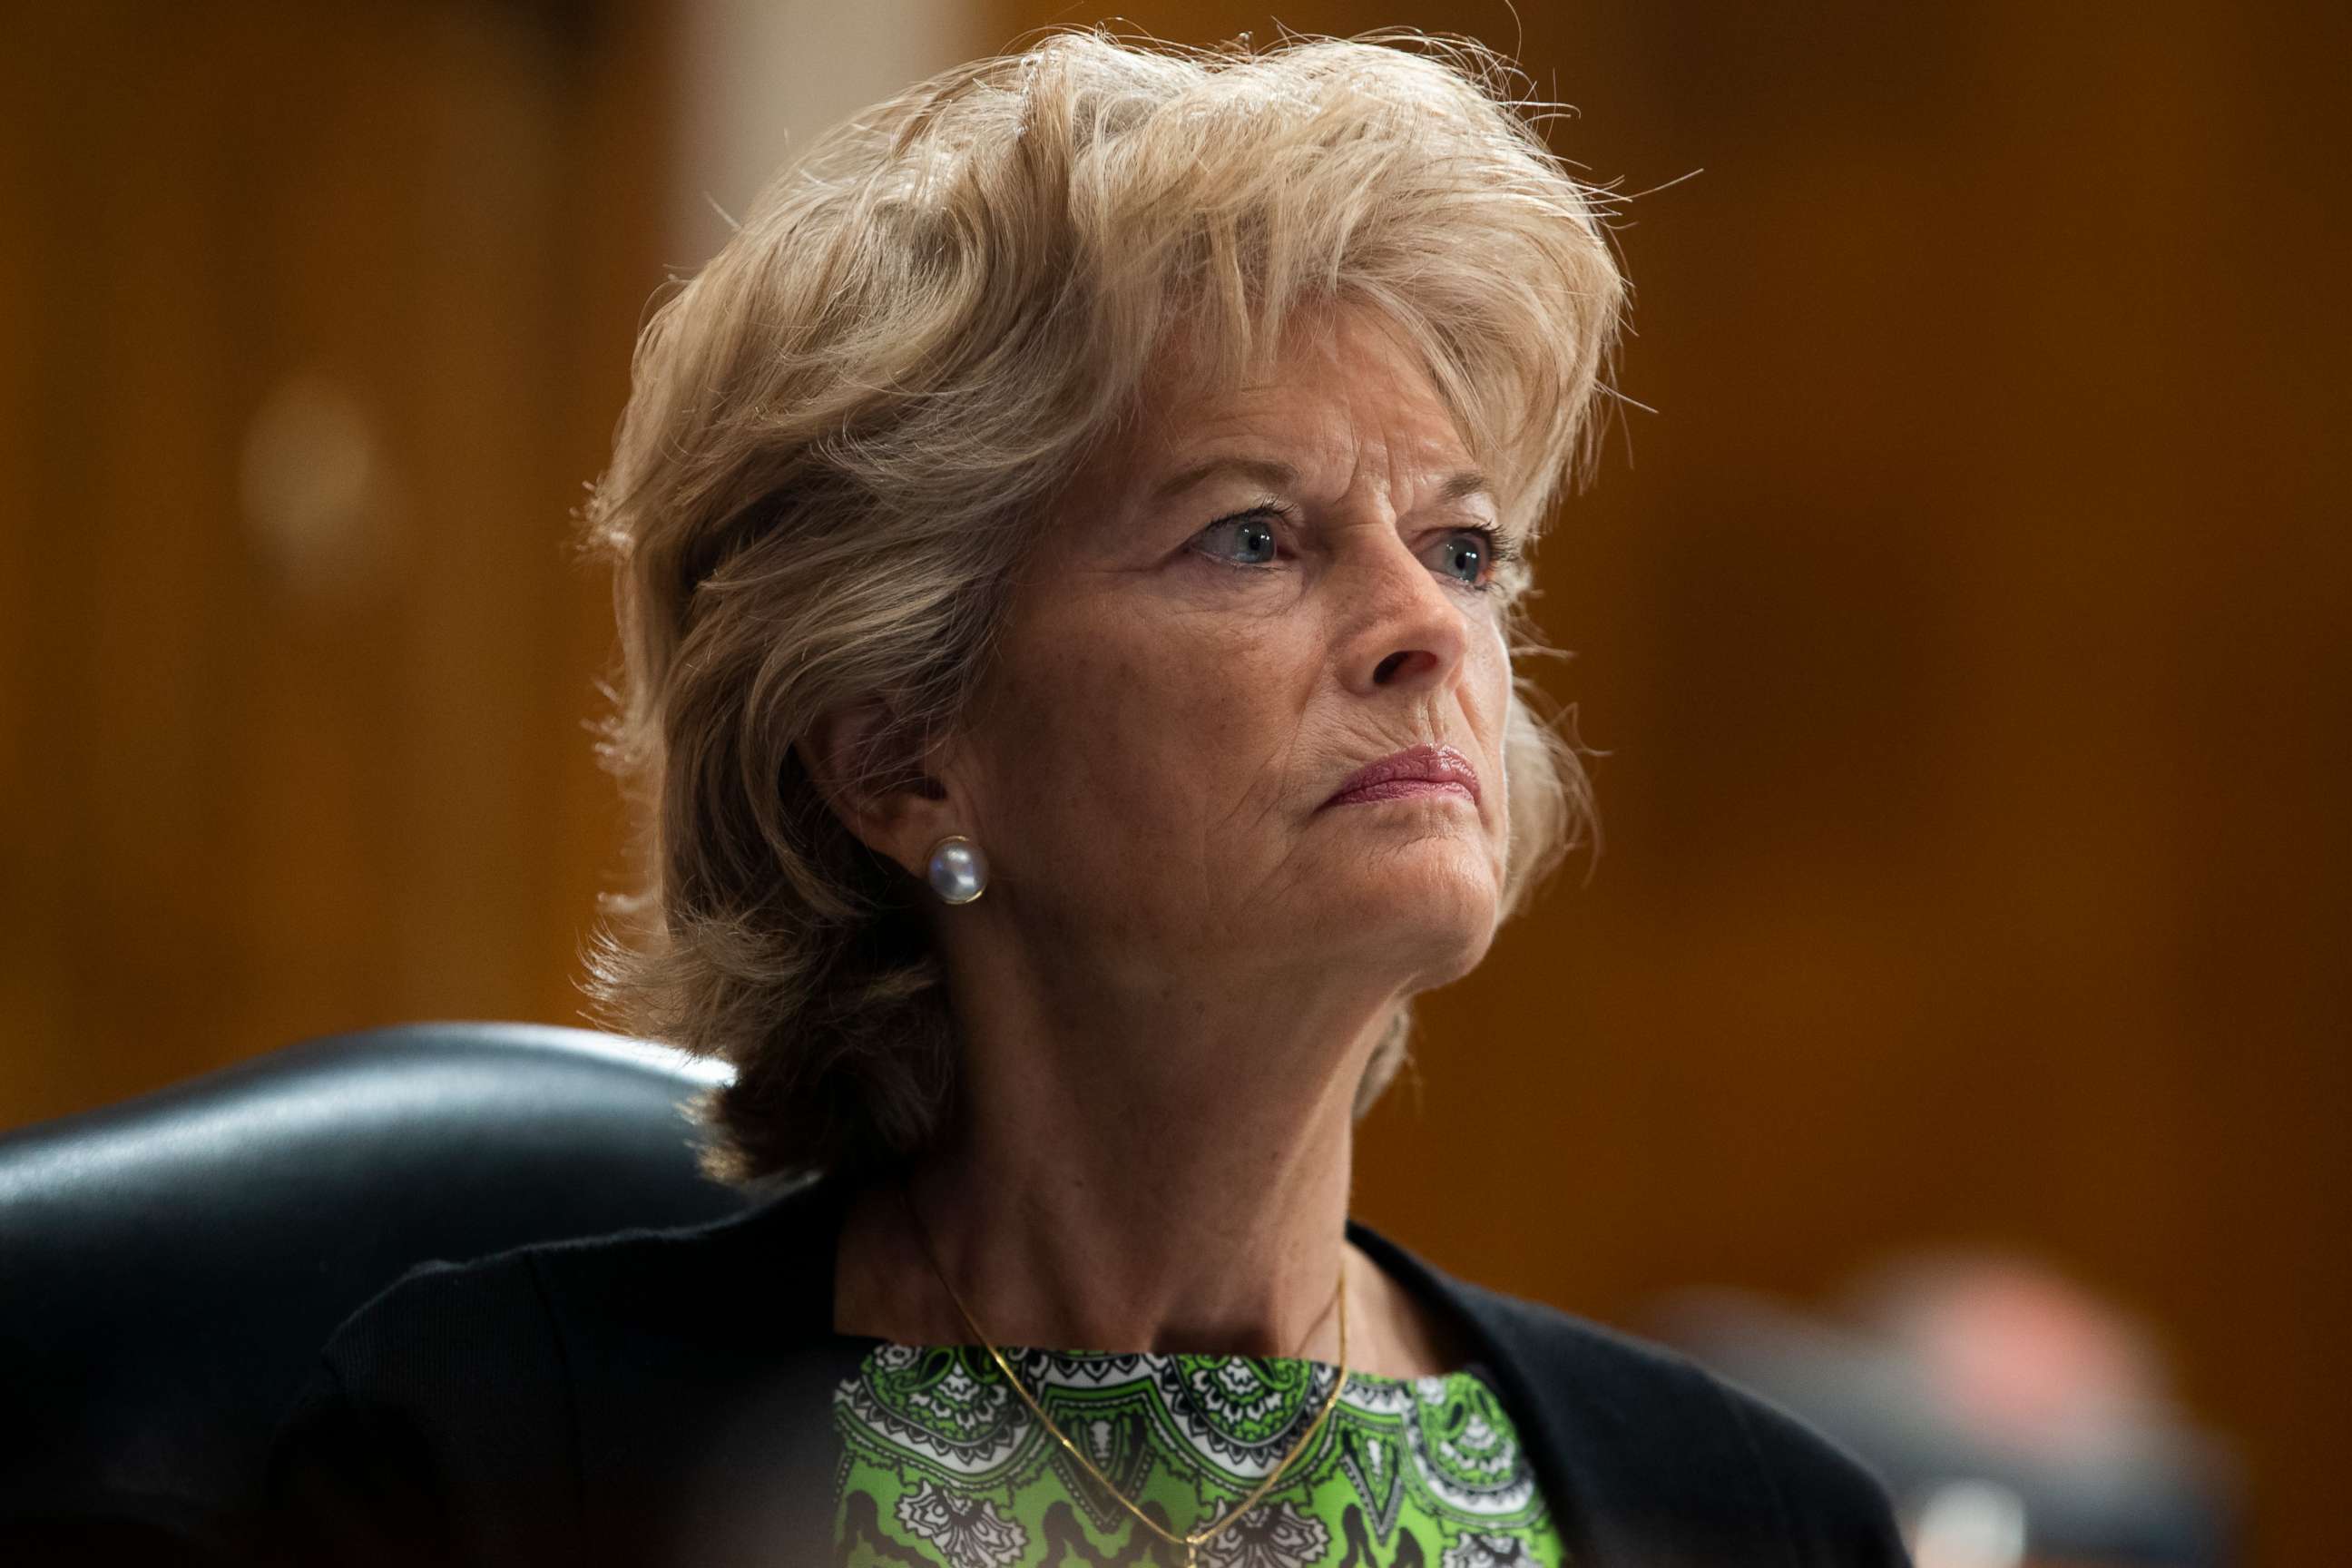 PHOTO: In this June 23, 2020, file photo Sen. Lisa Murkowski, R-Alaska, listens during a Senate Health, Education, Labor, and Pensions Committee hearing to examine COVID-19 on Capitol Hill in Washington.